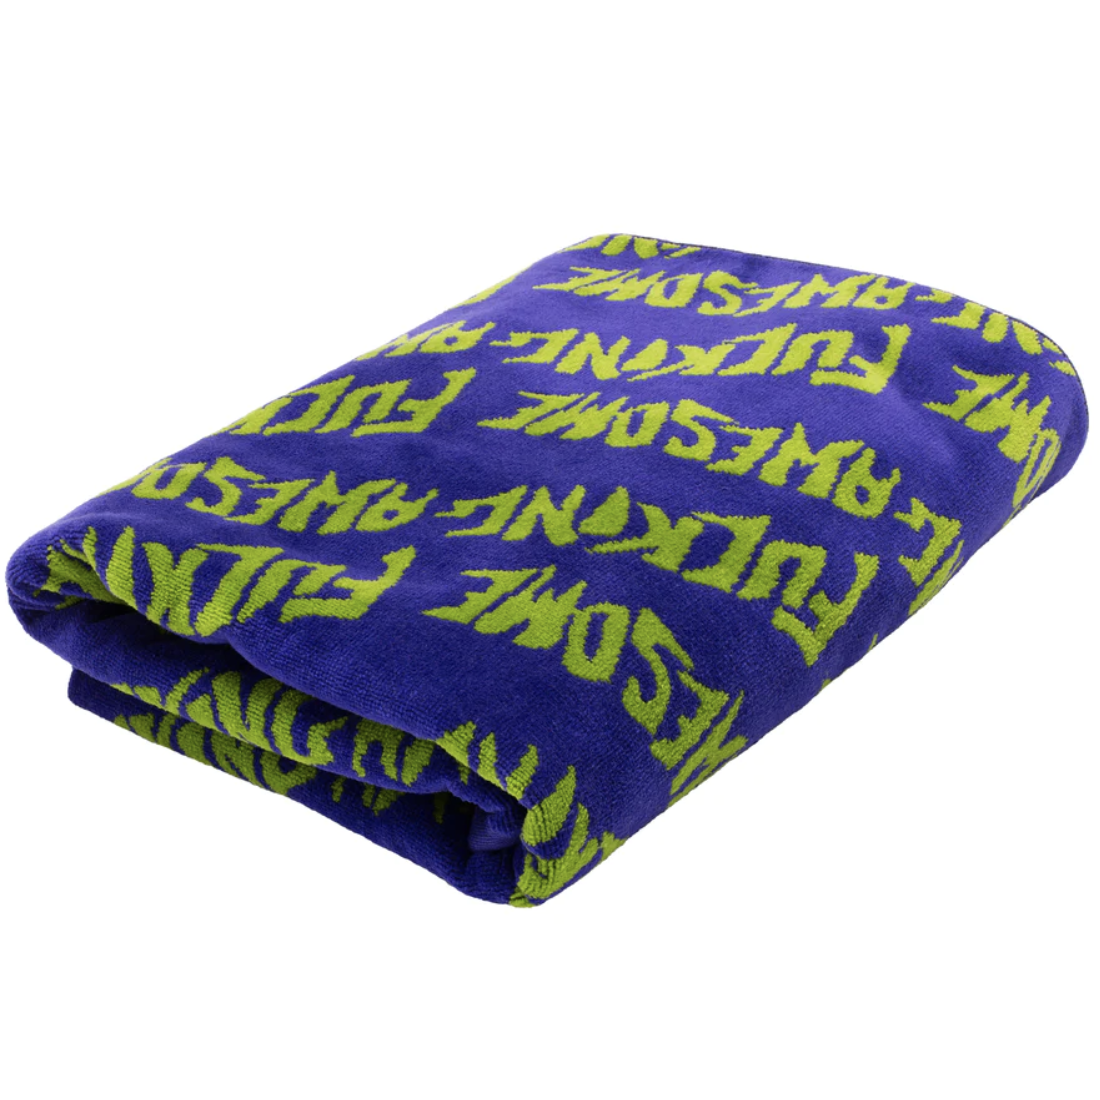 Fucking Awesome Stamp Towel Purple/Lime Green